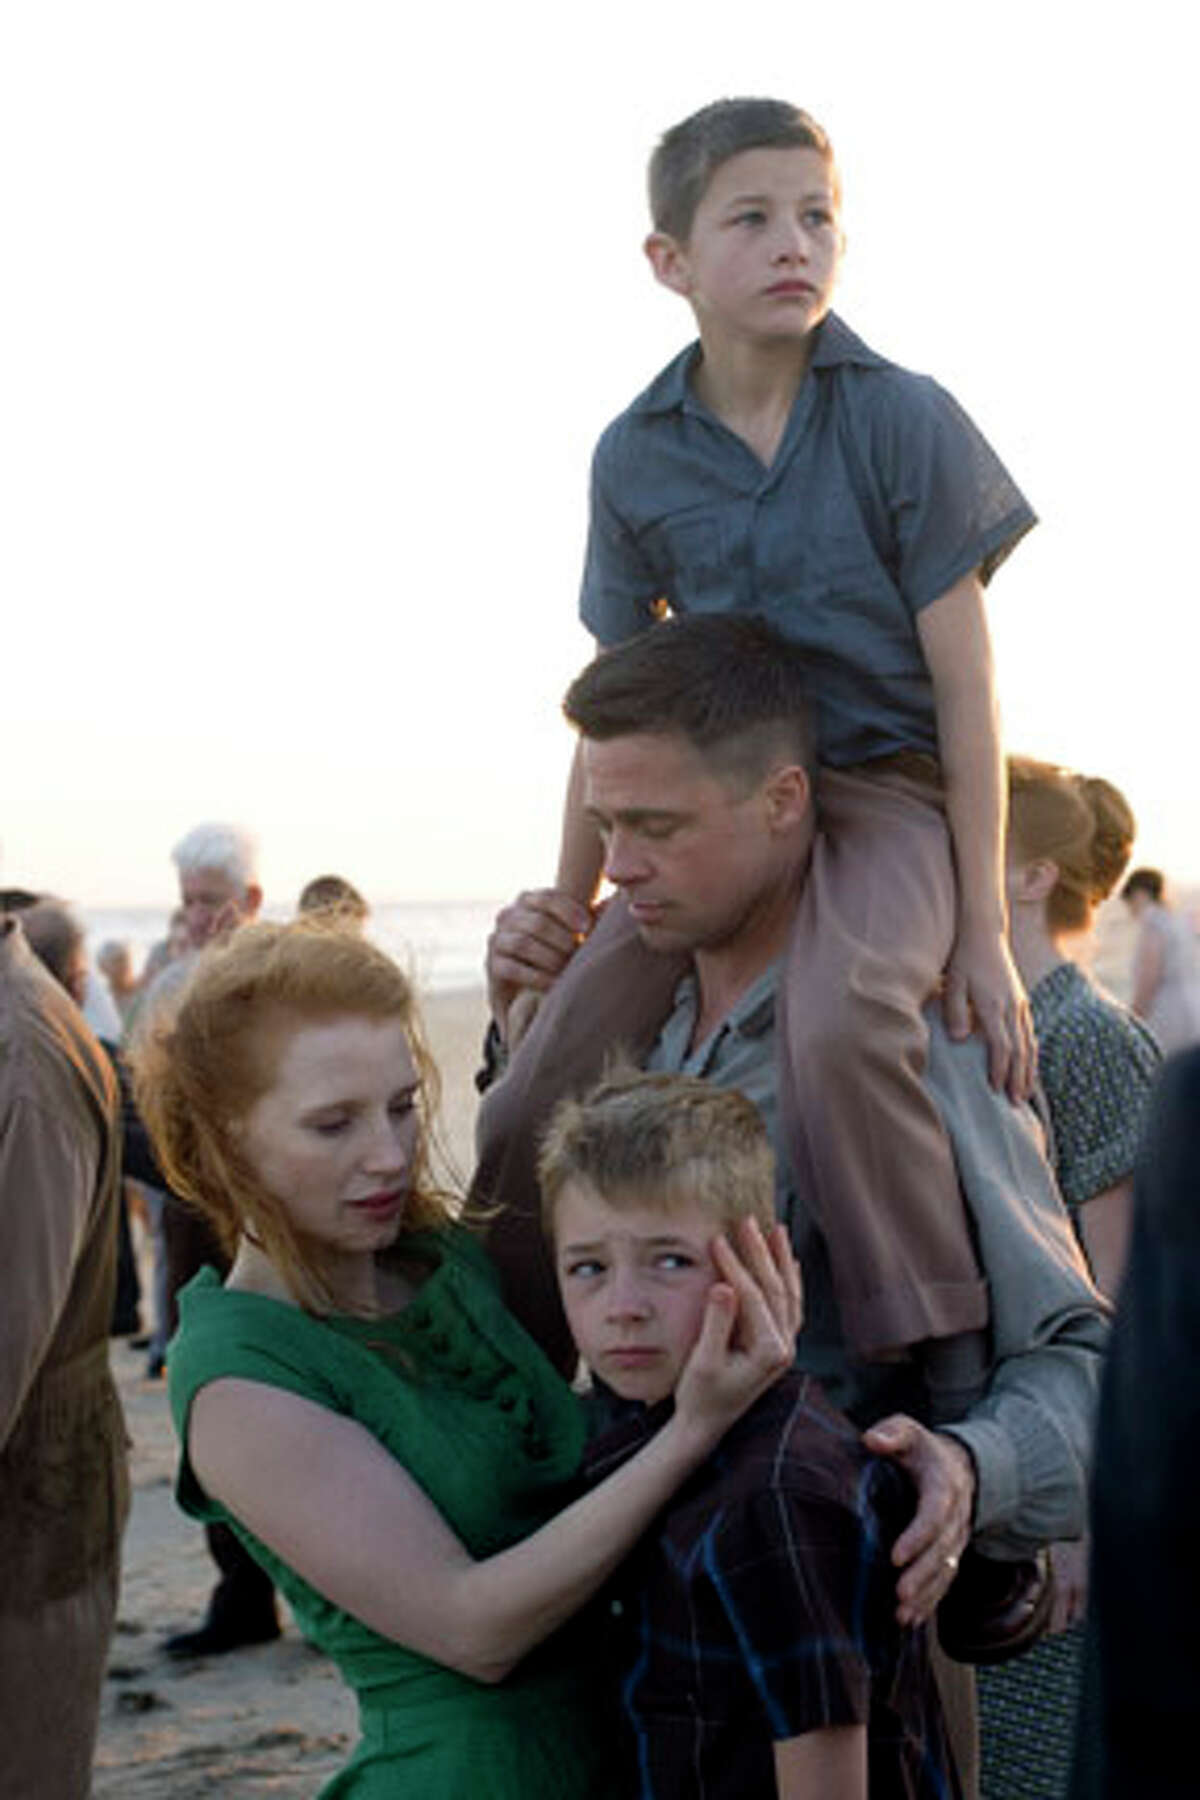 (Clockwise from left) Jessica Chastain as Mrs. O'Brien, Tye Sheridan as Steve, Brad Pitt as Mr. O'Brien and Laramie Eppler as R.L. in "The Tree of Life."